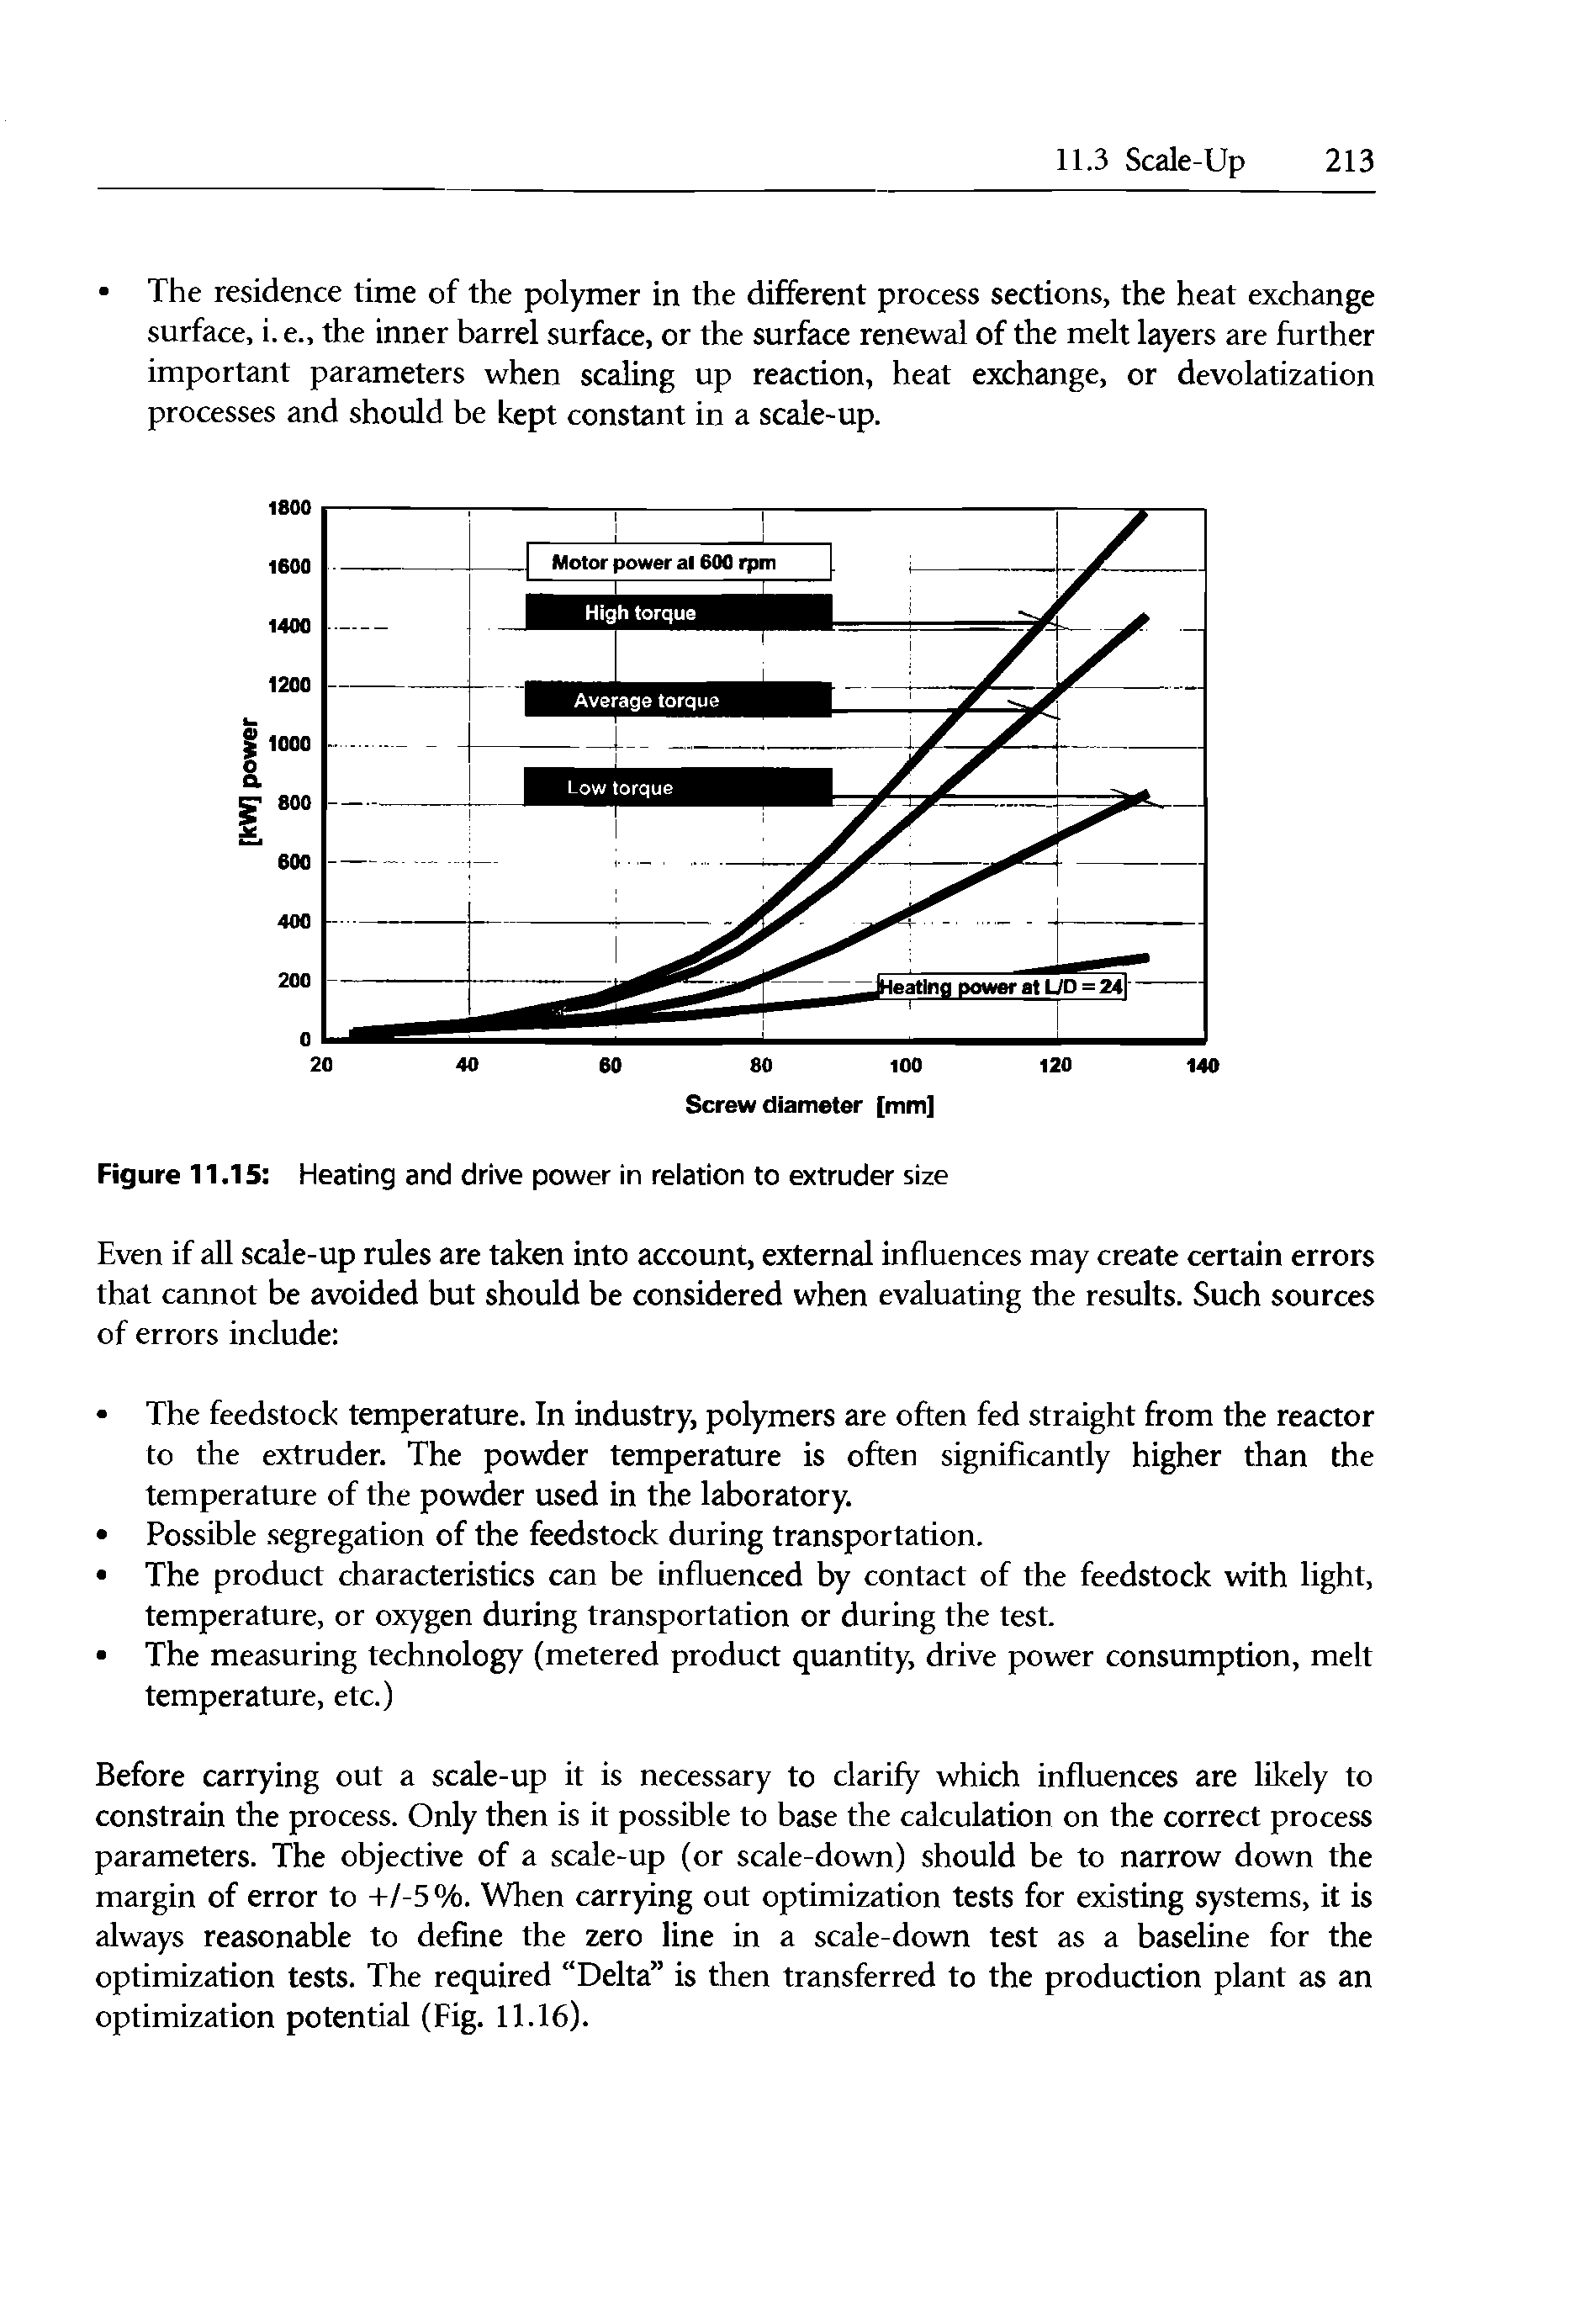 Figure 11.15 Heating and drive power in relation to extruder size...